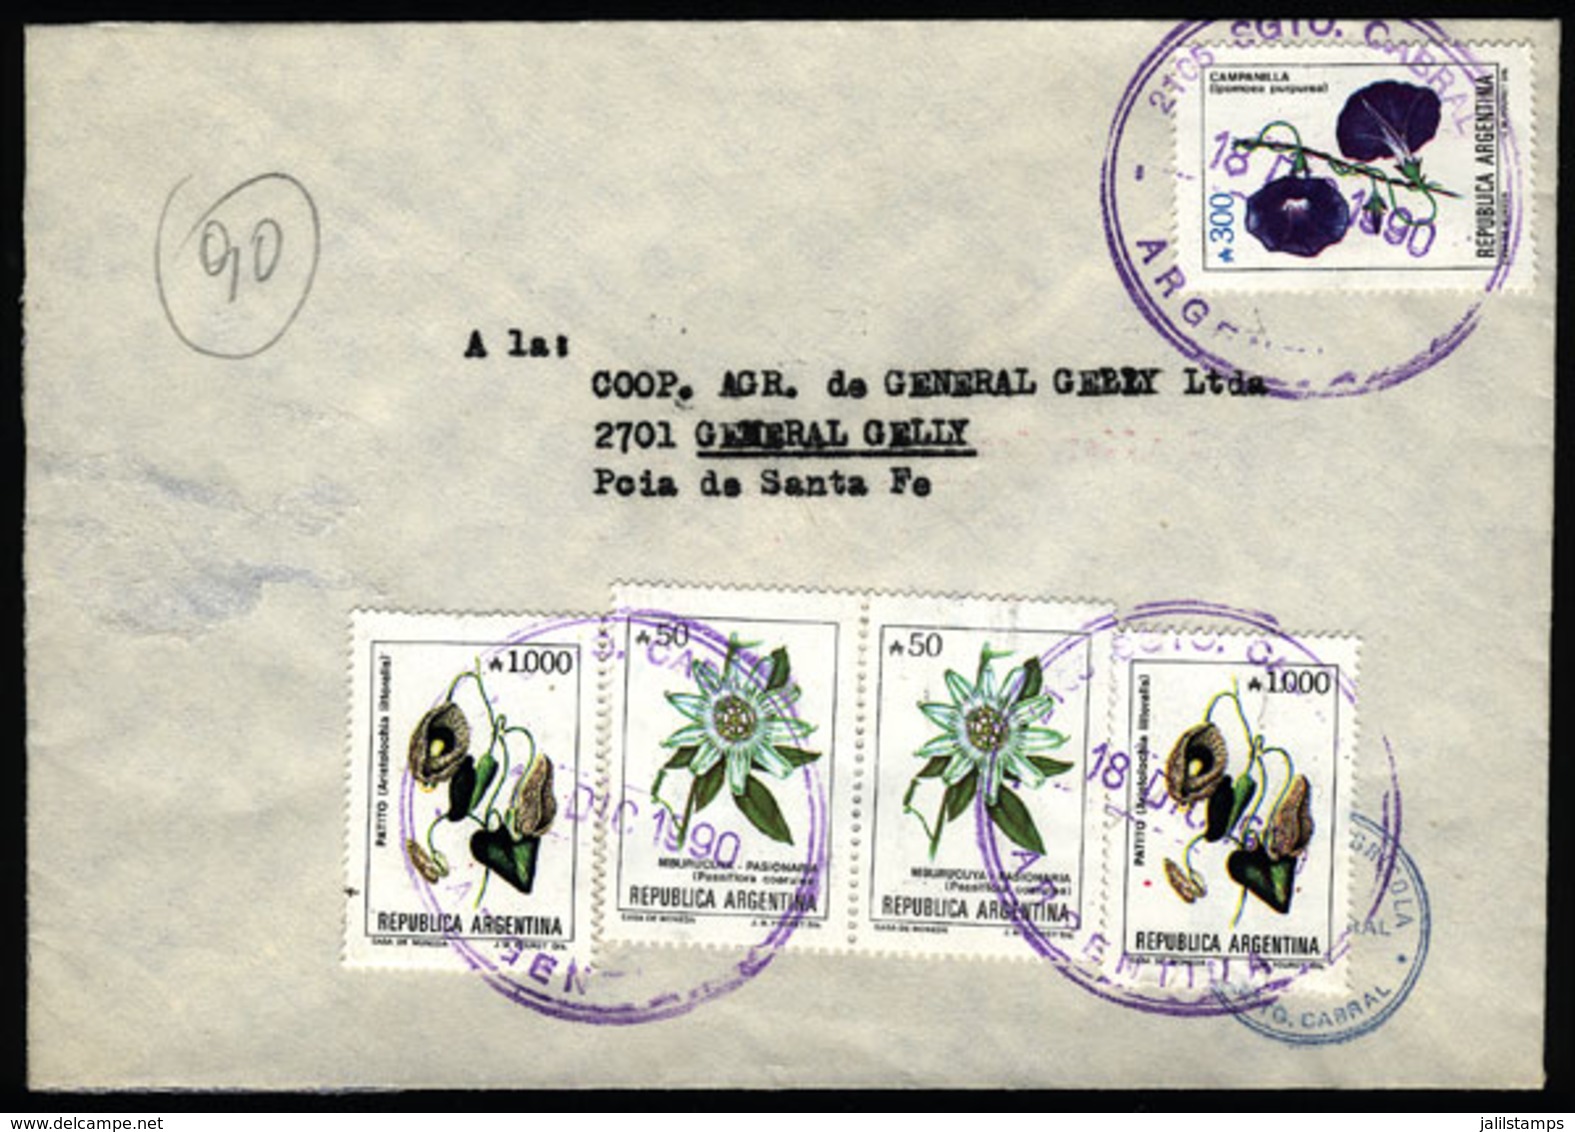 ARGENTINA: Cover Sent From "SGTO. CABRAL" (Santa Fe) To General Gelly (Santa Fe) On 18/DE/1990, With INFLA Postage Of A2 - Cartas & Documentos